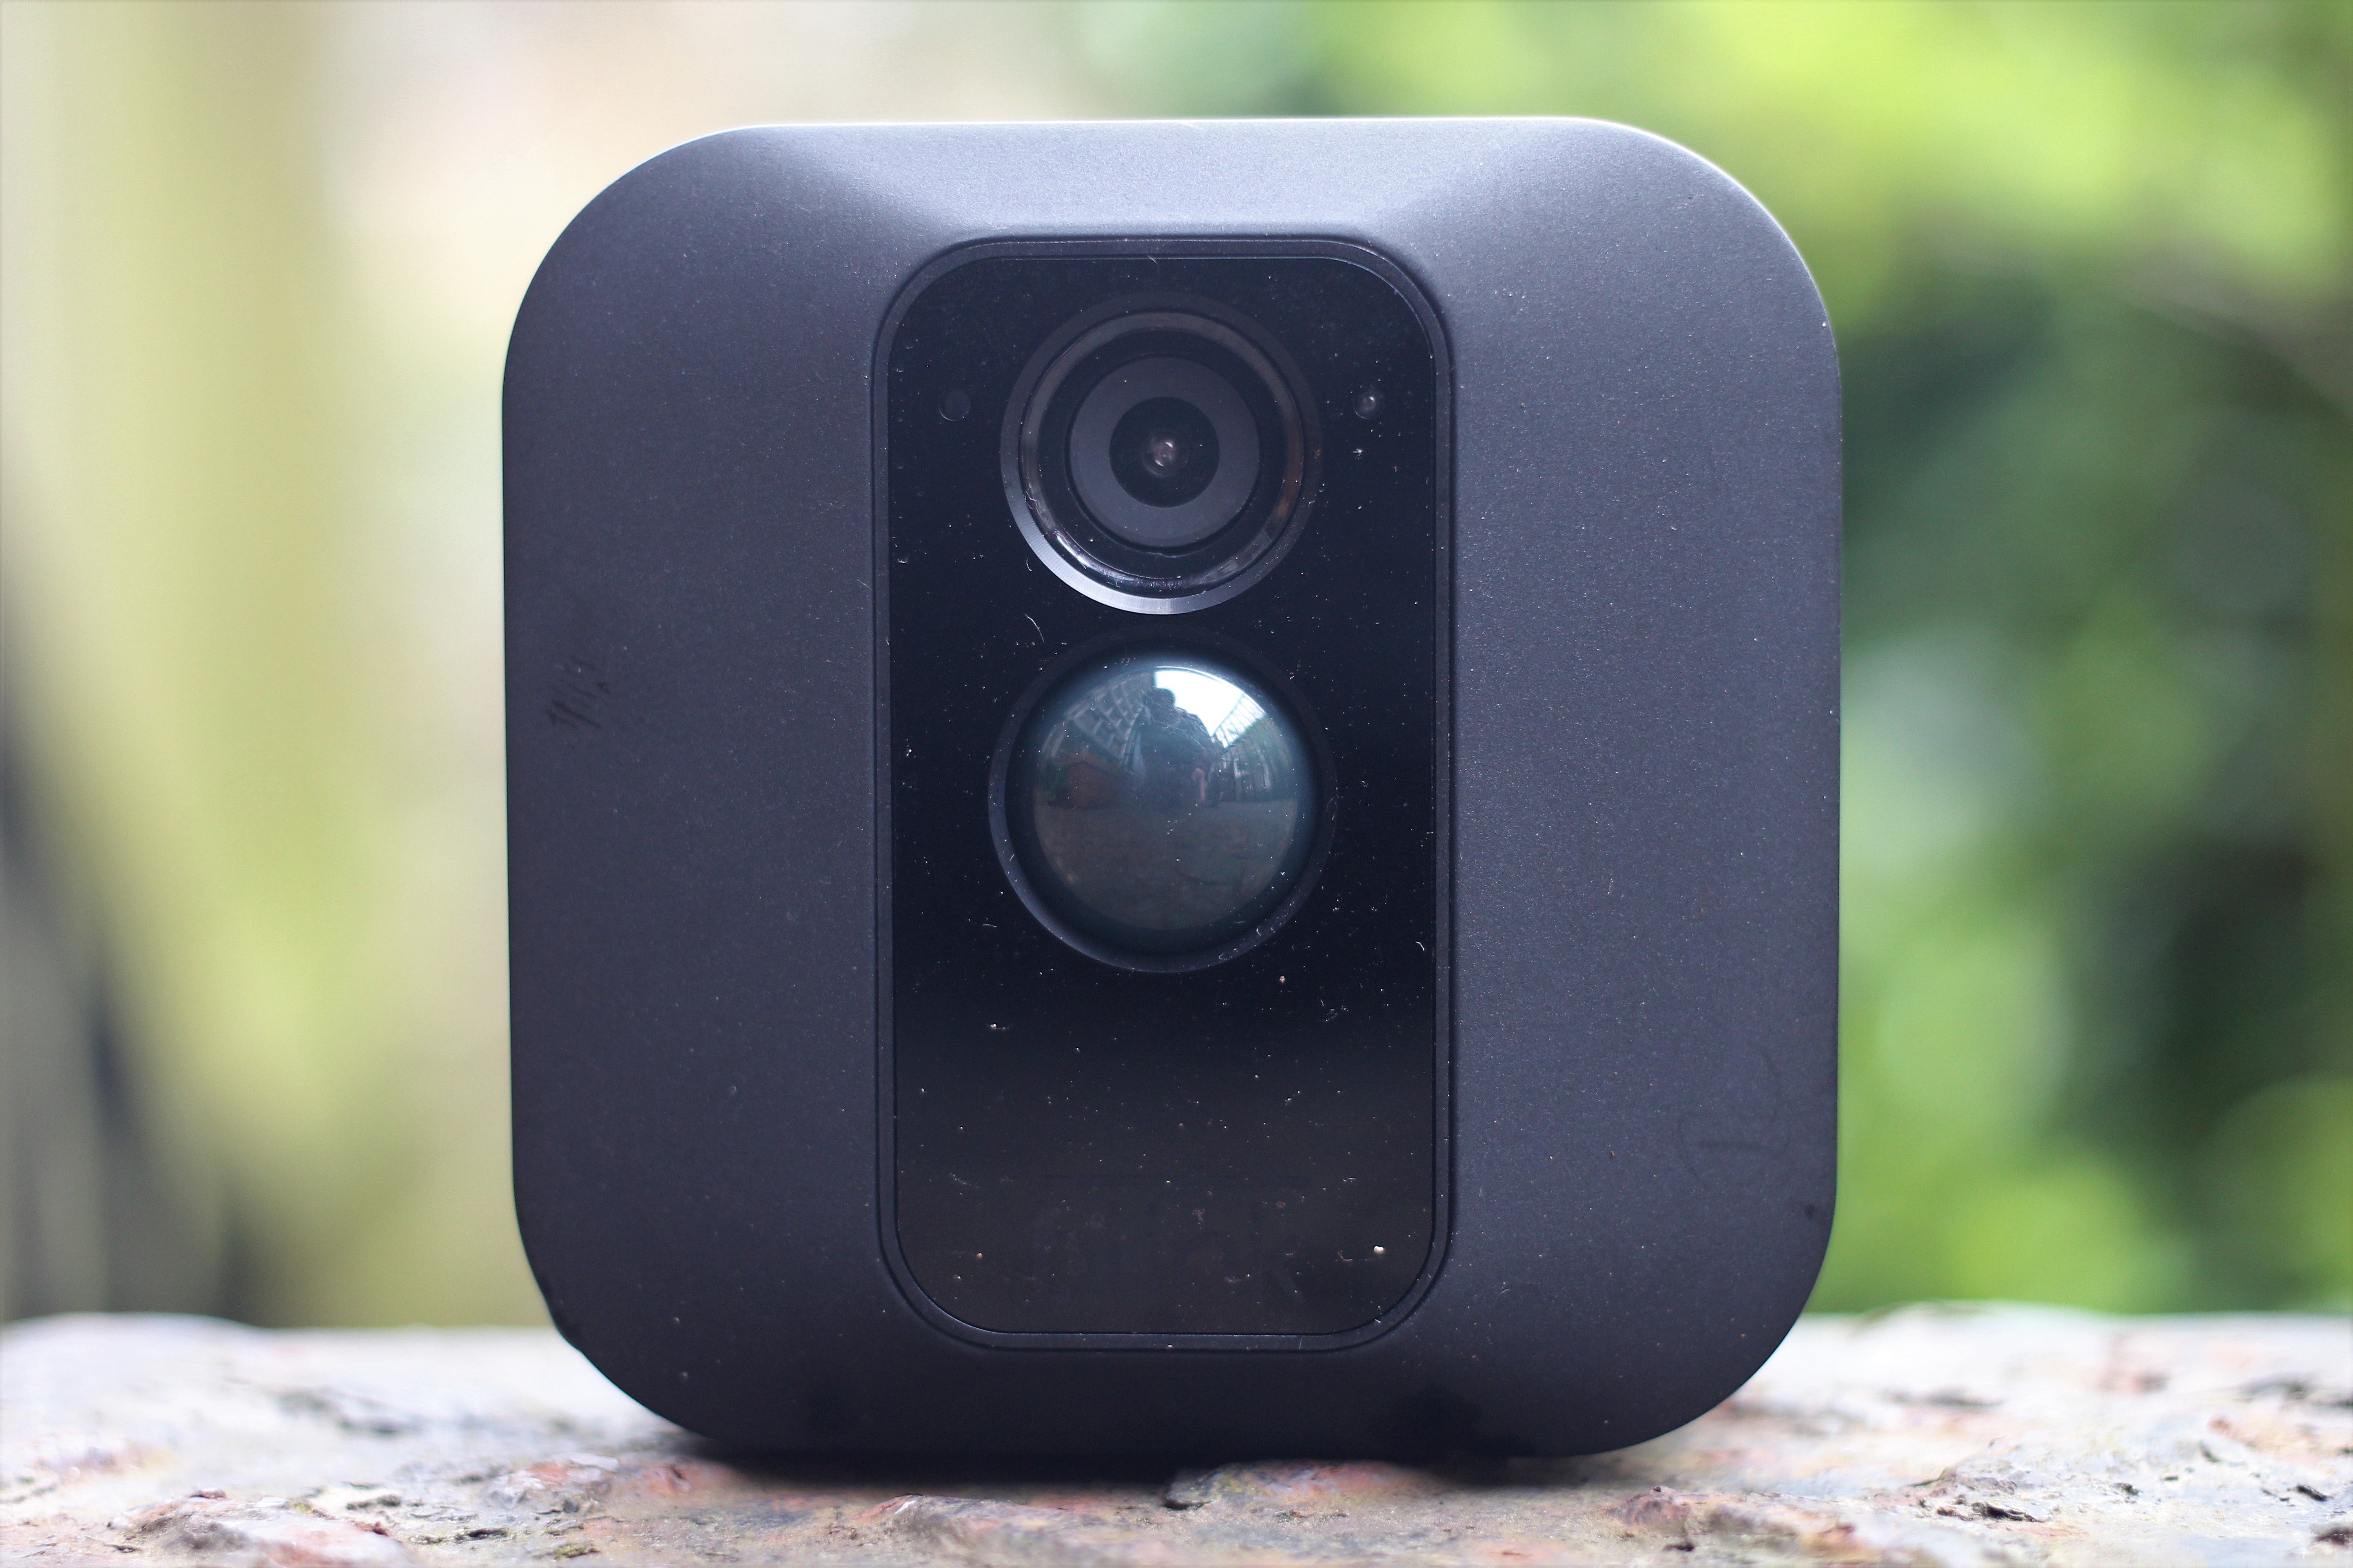 Blink XT outdoor security camera on a natural background.